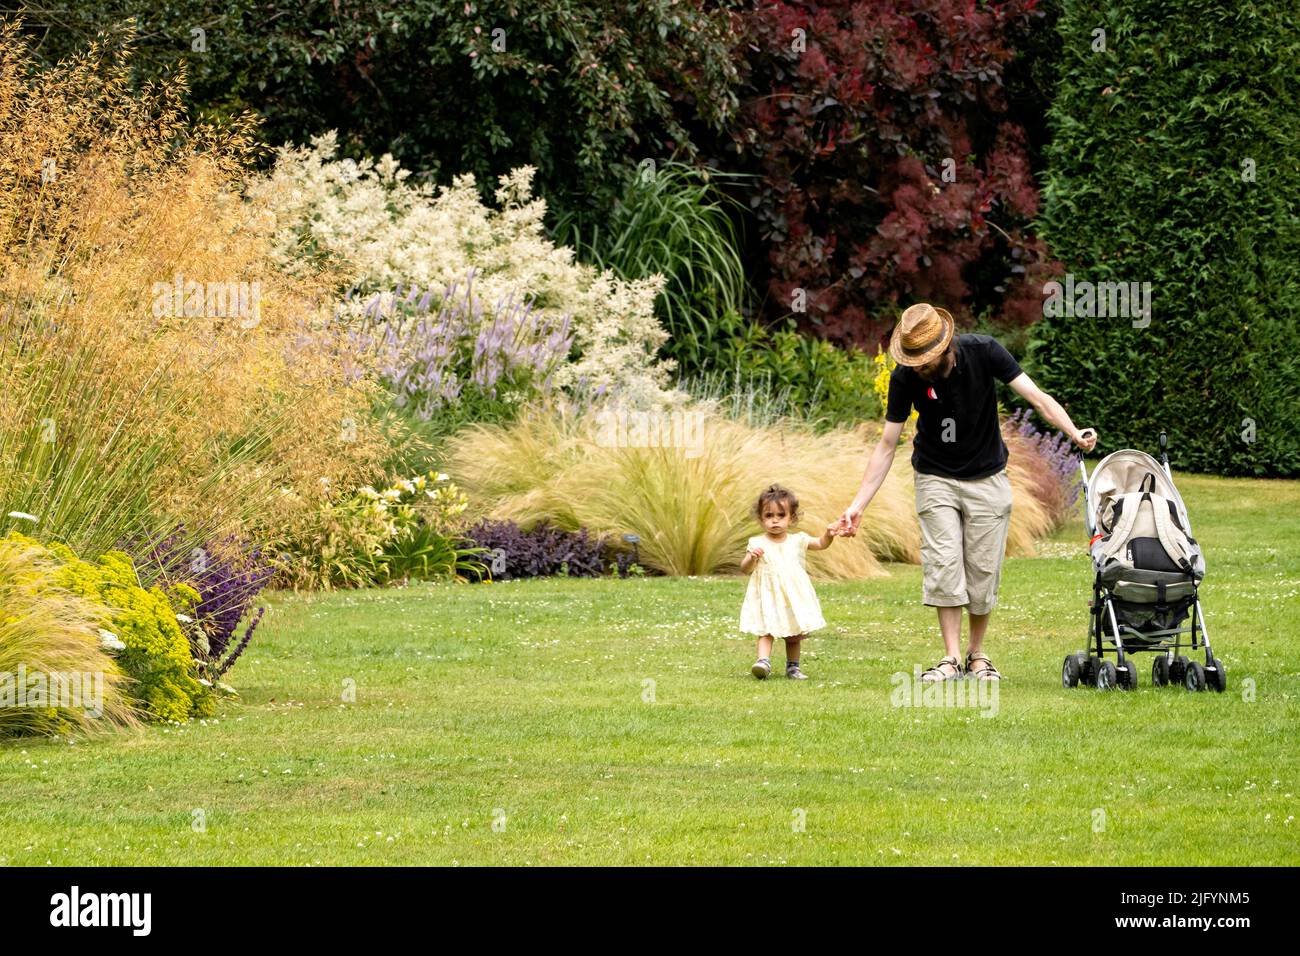 Visitors at Waterperry garden near Oxford UK in summer Stock Photo